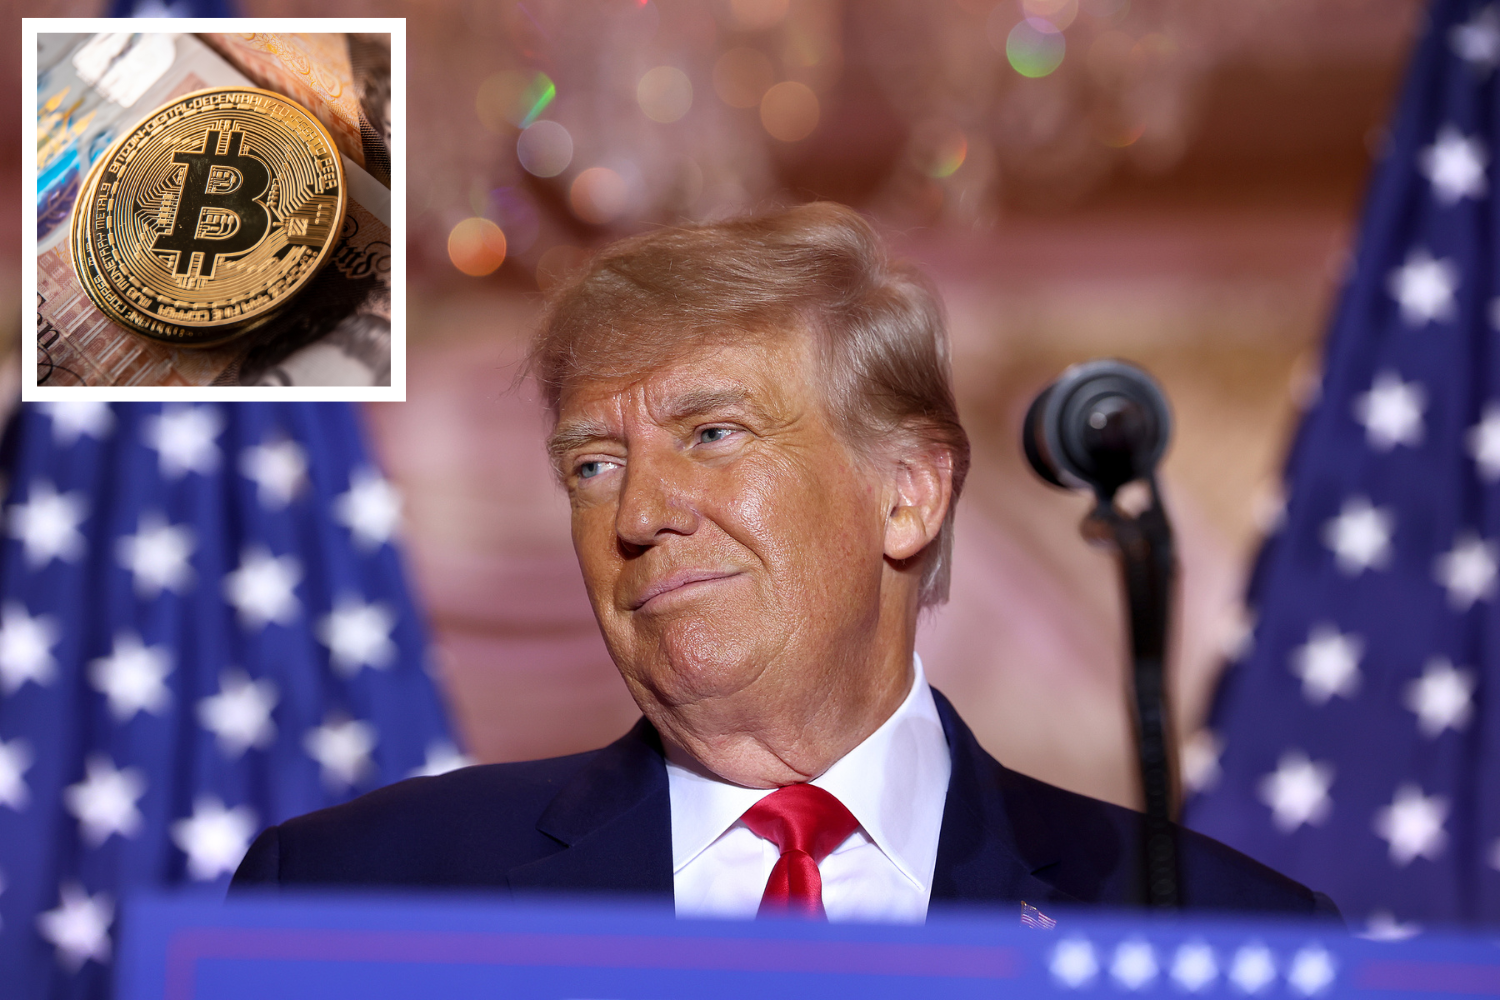 Btrump crypto currency best cryptocurrency newsletters